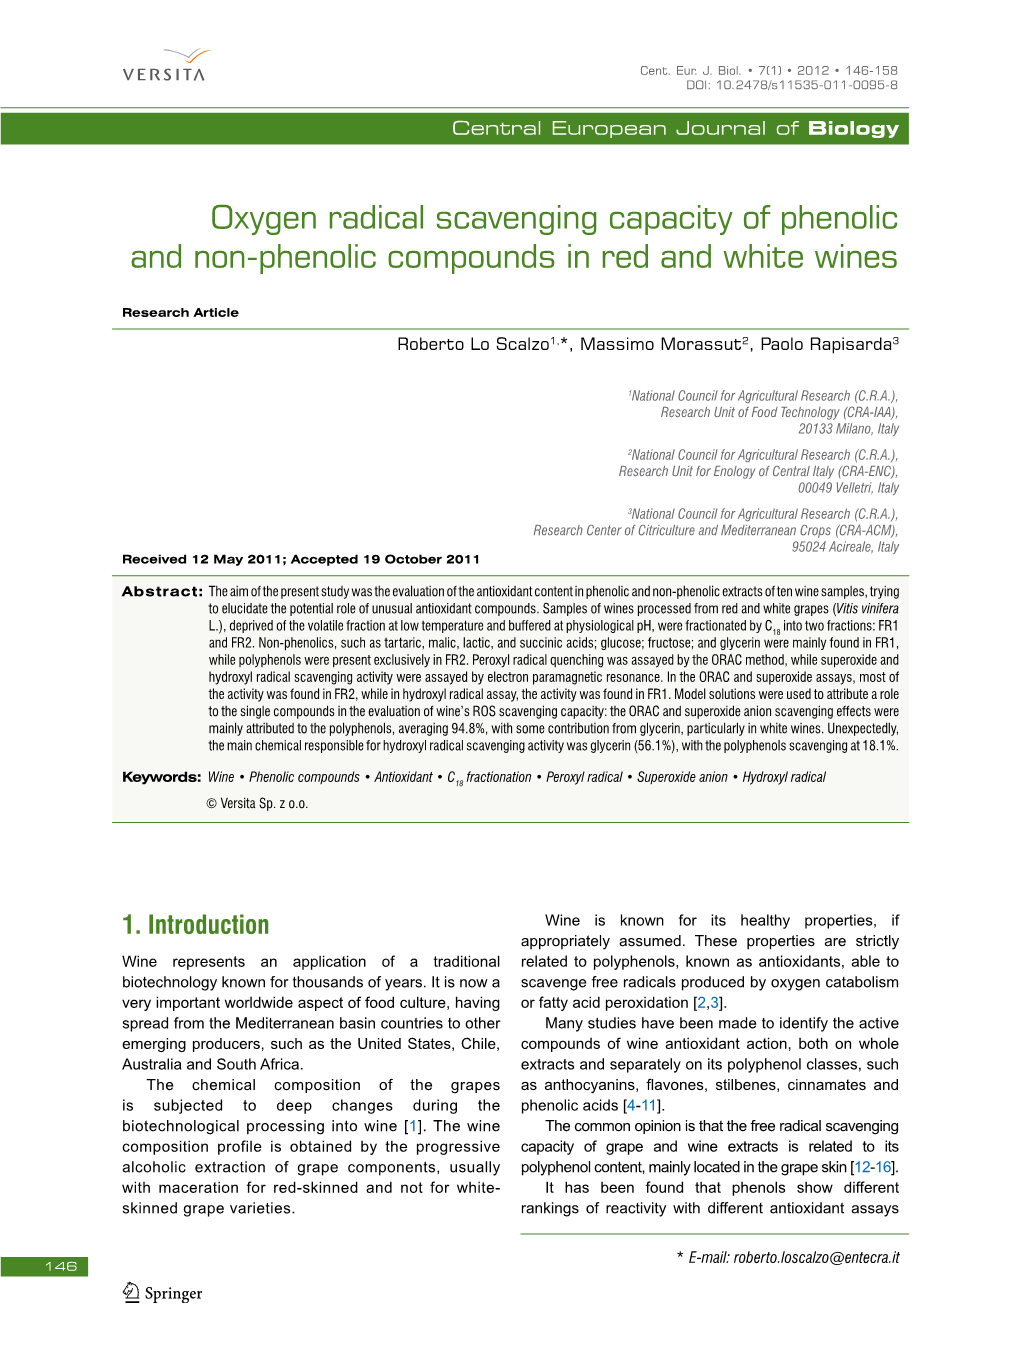 Oxygen Radical Scavenging Capacity of Phenolic and Non-Phenolic Compounds in Red and White Wines